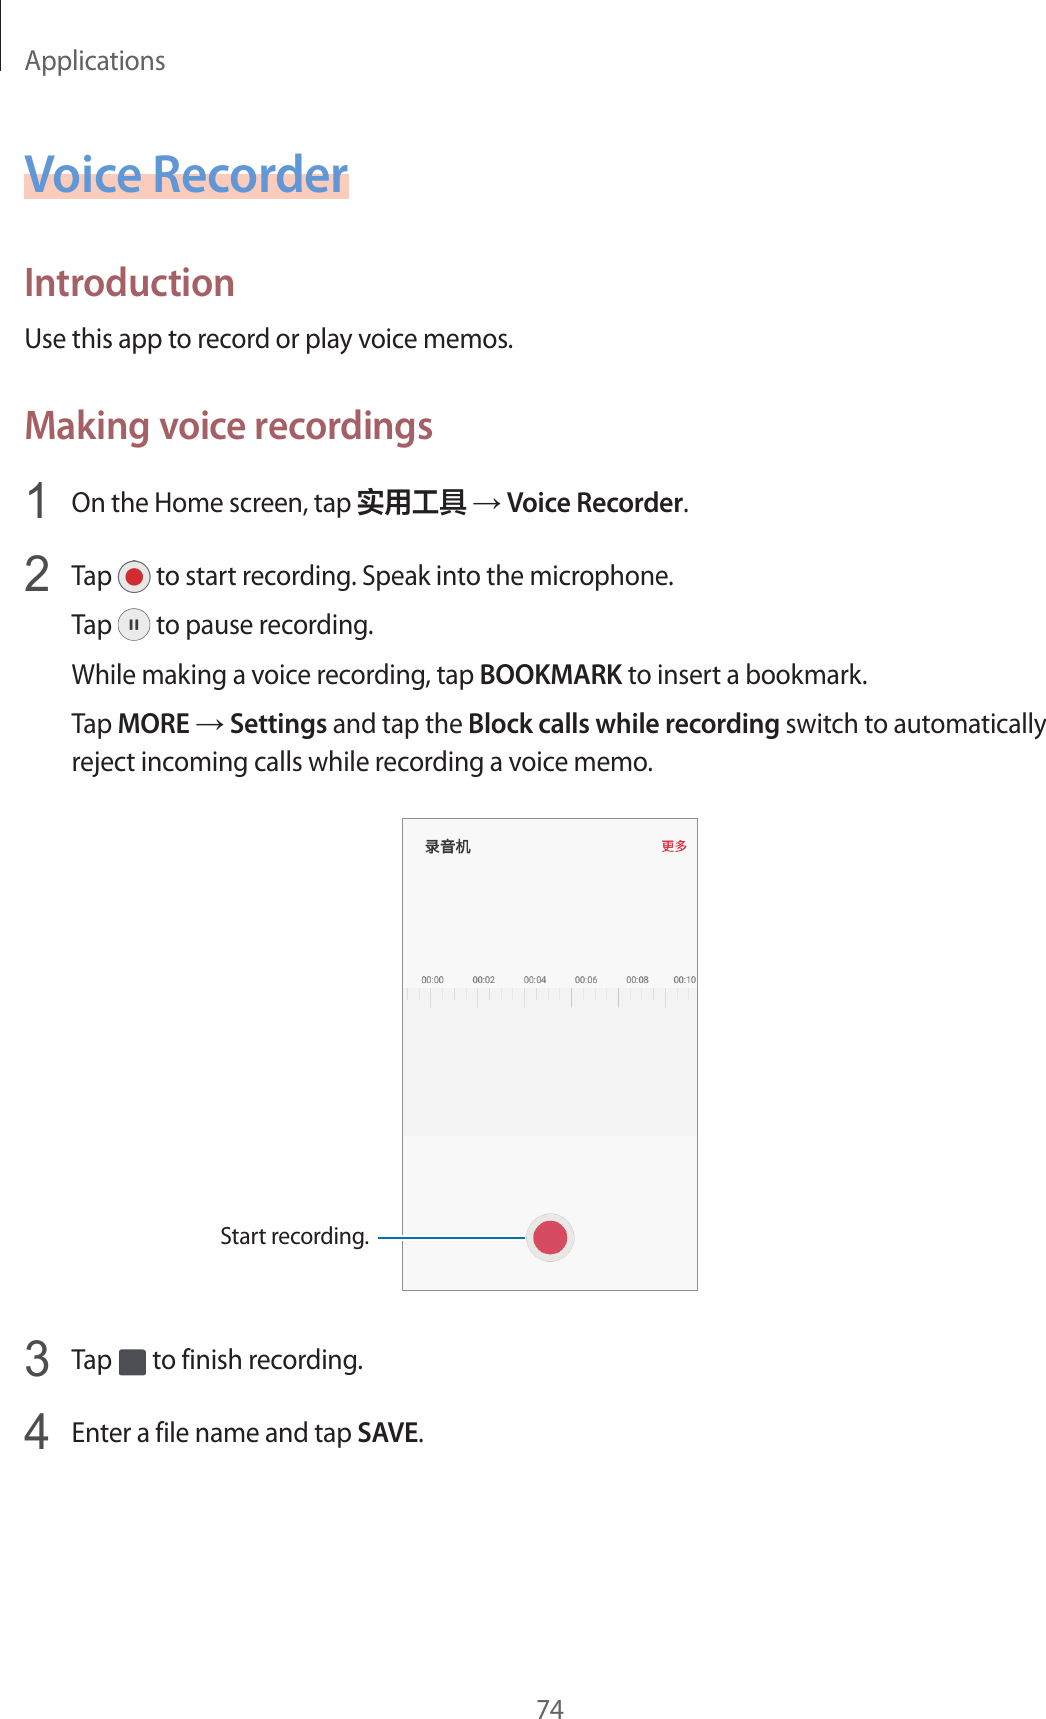 Applications74Voice RecorderIntroductionUse this app to record or play voice memos.Making voice recordings1  On the Home screen, tap 实用工具 → Voice Recorder.2  Tap   to start recording. Speak into the microphone.Tap   to pause recording.While making a voice recording, tap BOOKMARK to insert a bookmark.Tap MORE → Settings and tap the Block calls while recording switch to automatically reject incoming calls while recording a voice memo.Start recording.3  Tap   to finish recording.4  Enter a file name and tap SAVE.